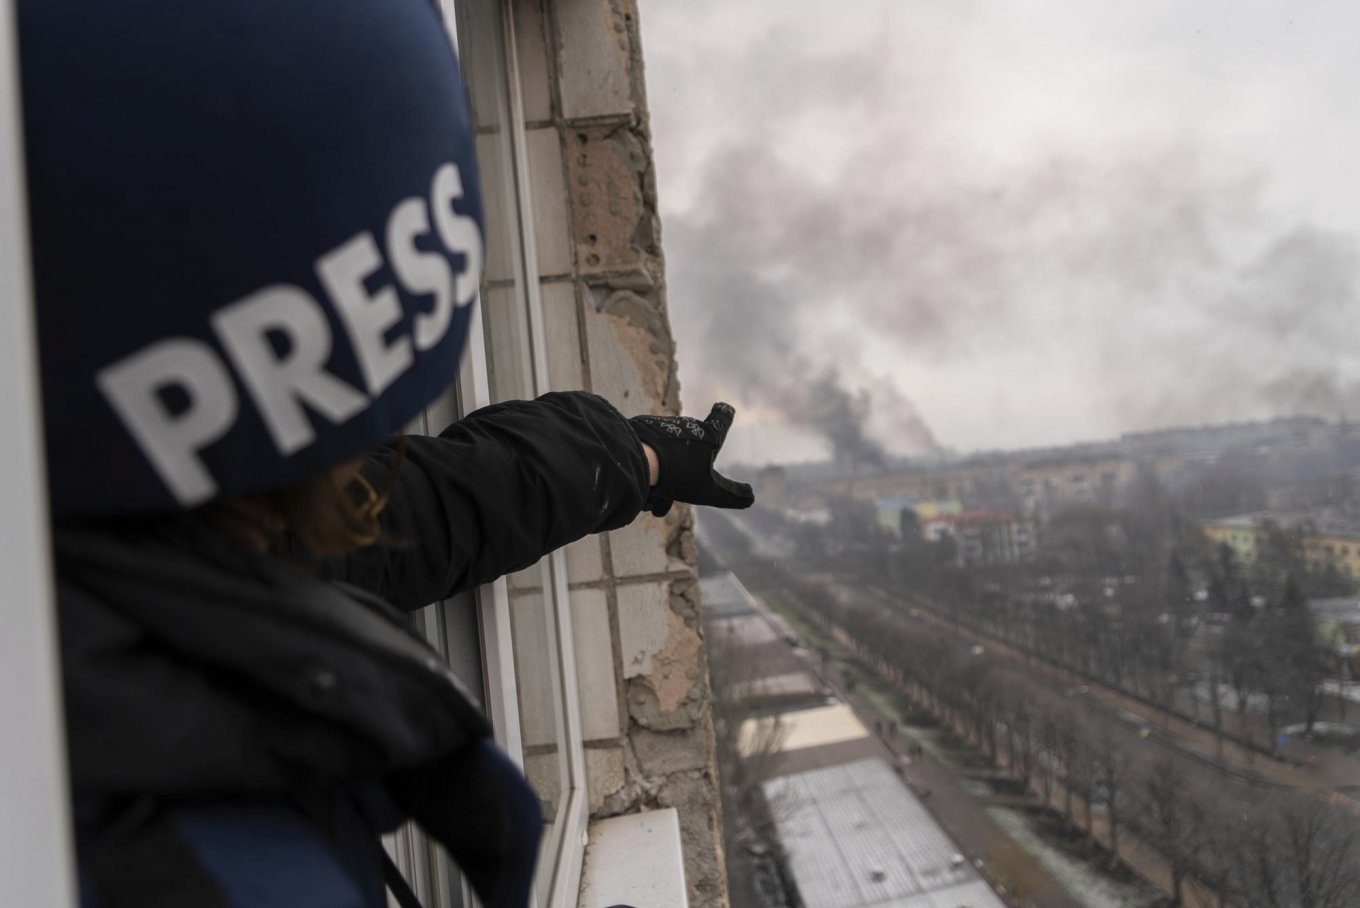 Why Russian Press-Tour for Foreign Media is a Provocation / Evgeniy Maloletka points at the smoke rising after an airstrike on a maternity hospital, in Mariupol, Ukraine